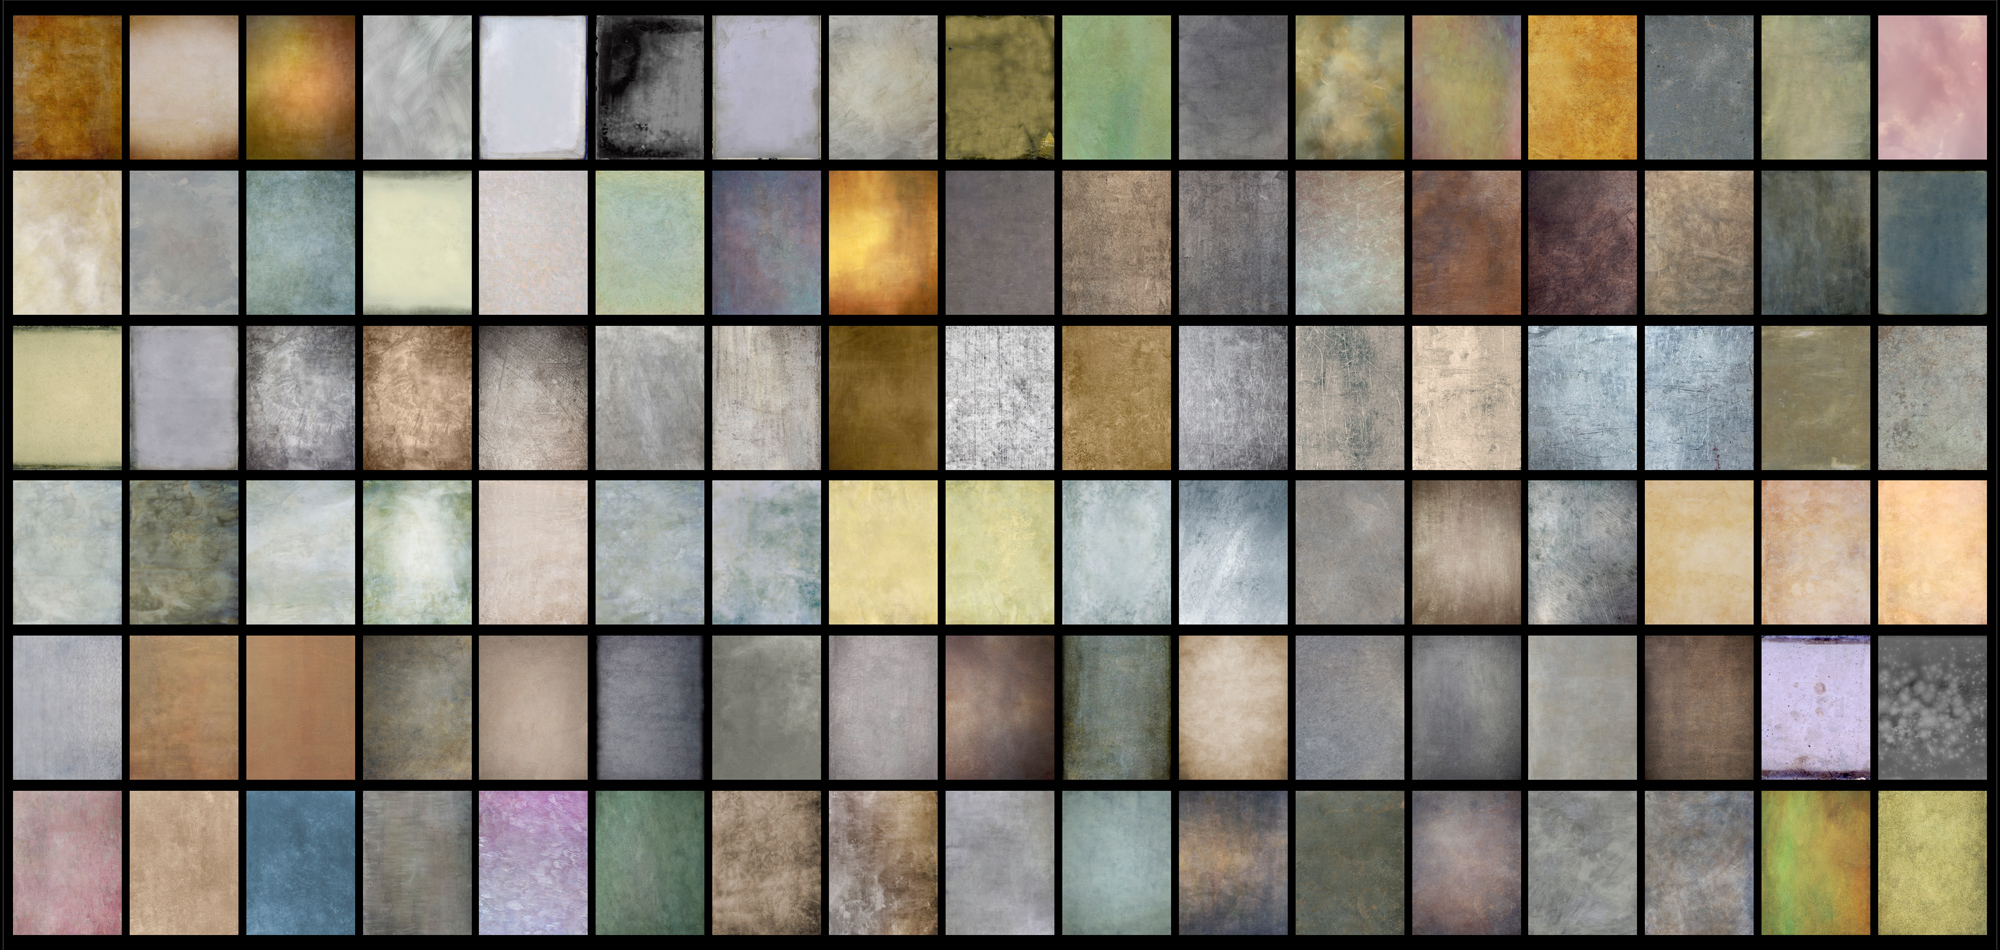 his is a small sample of the textures I use often.